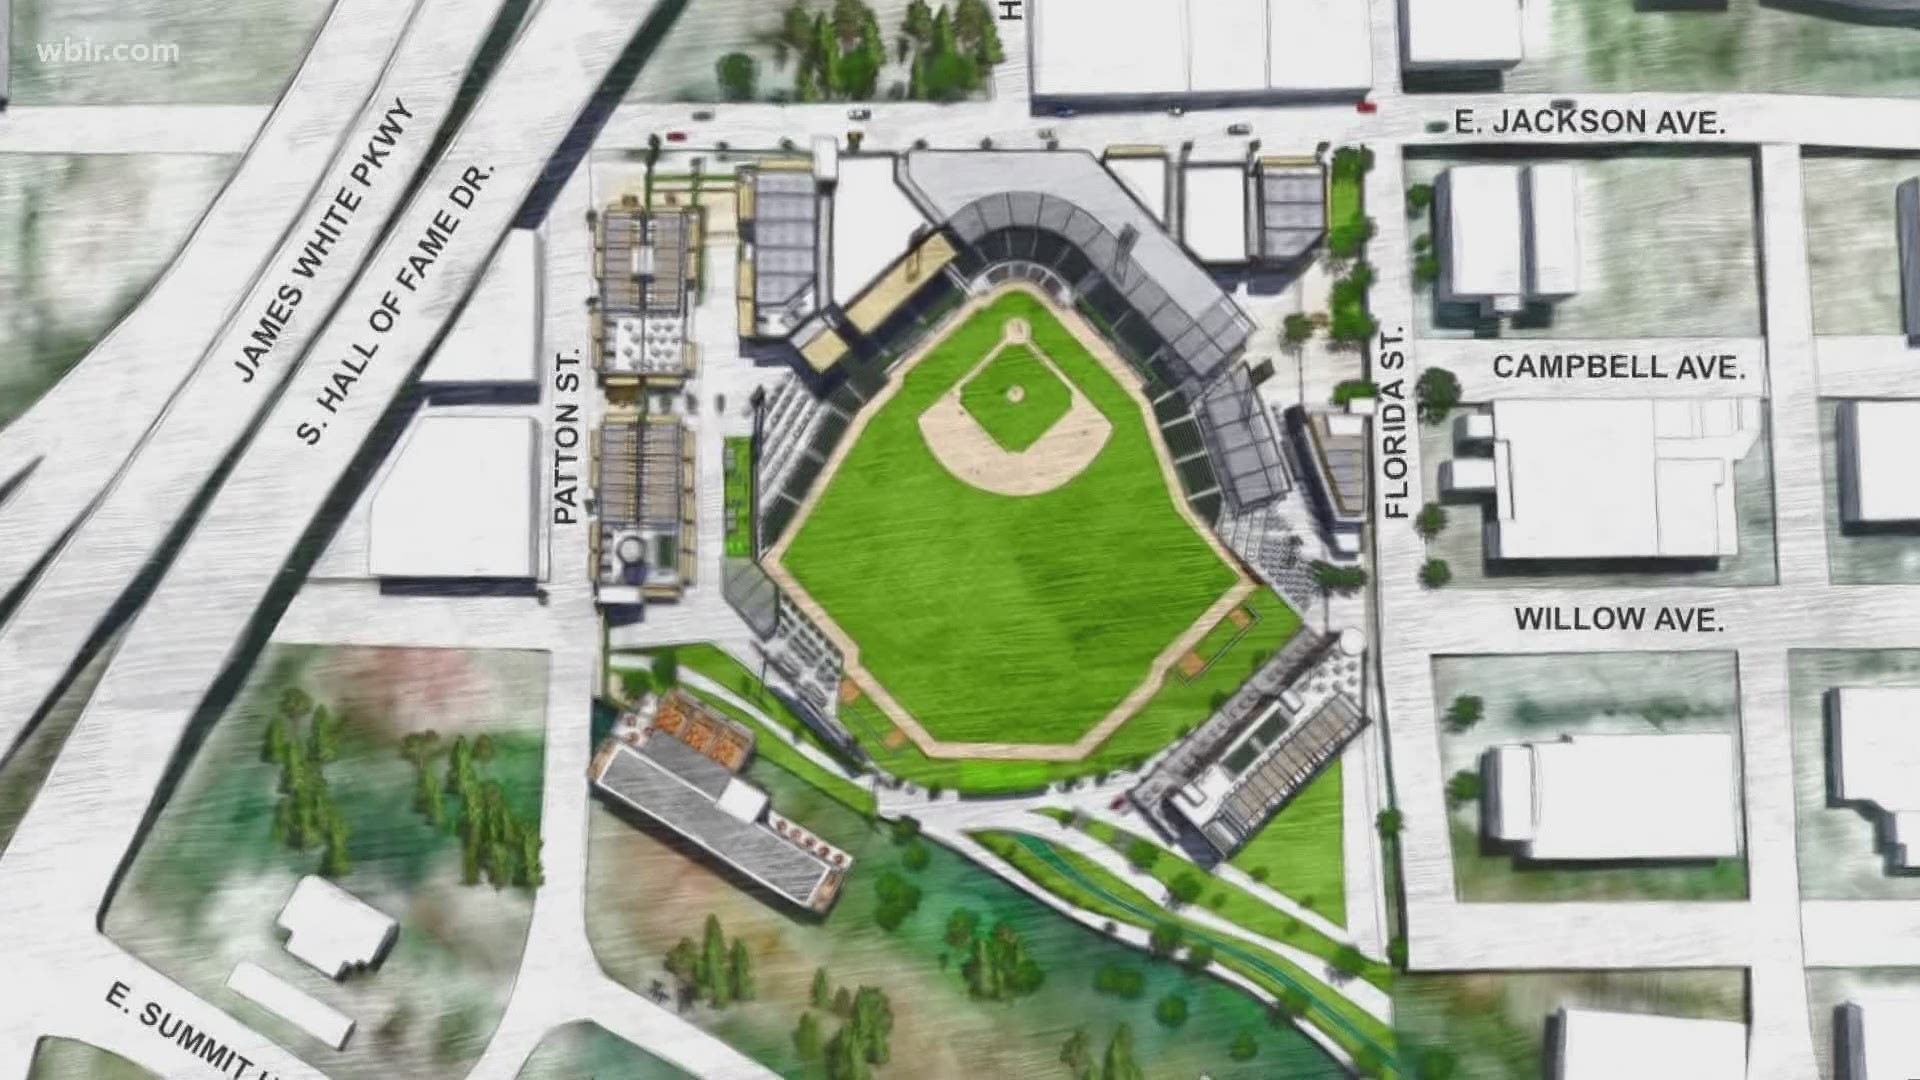 Sports fans and skeptics will get a chance to learn more about the proposed baseball stadium in downtown Knoxville.